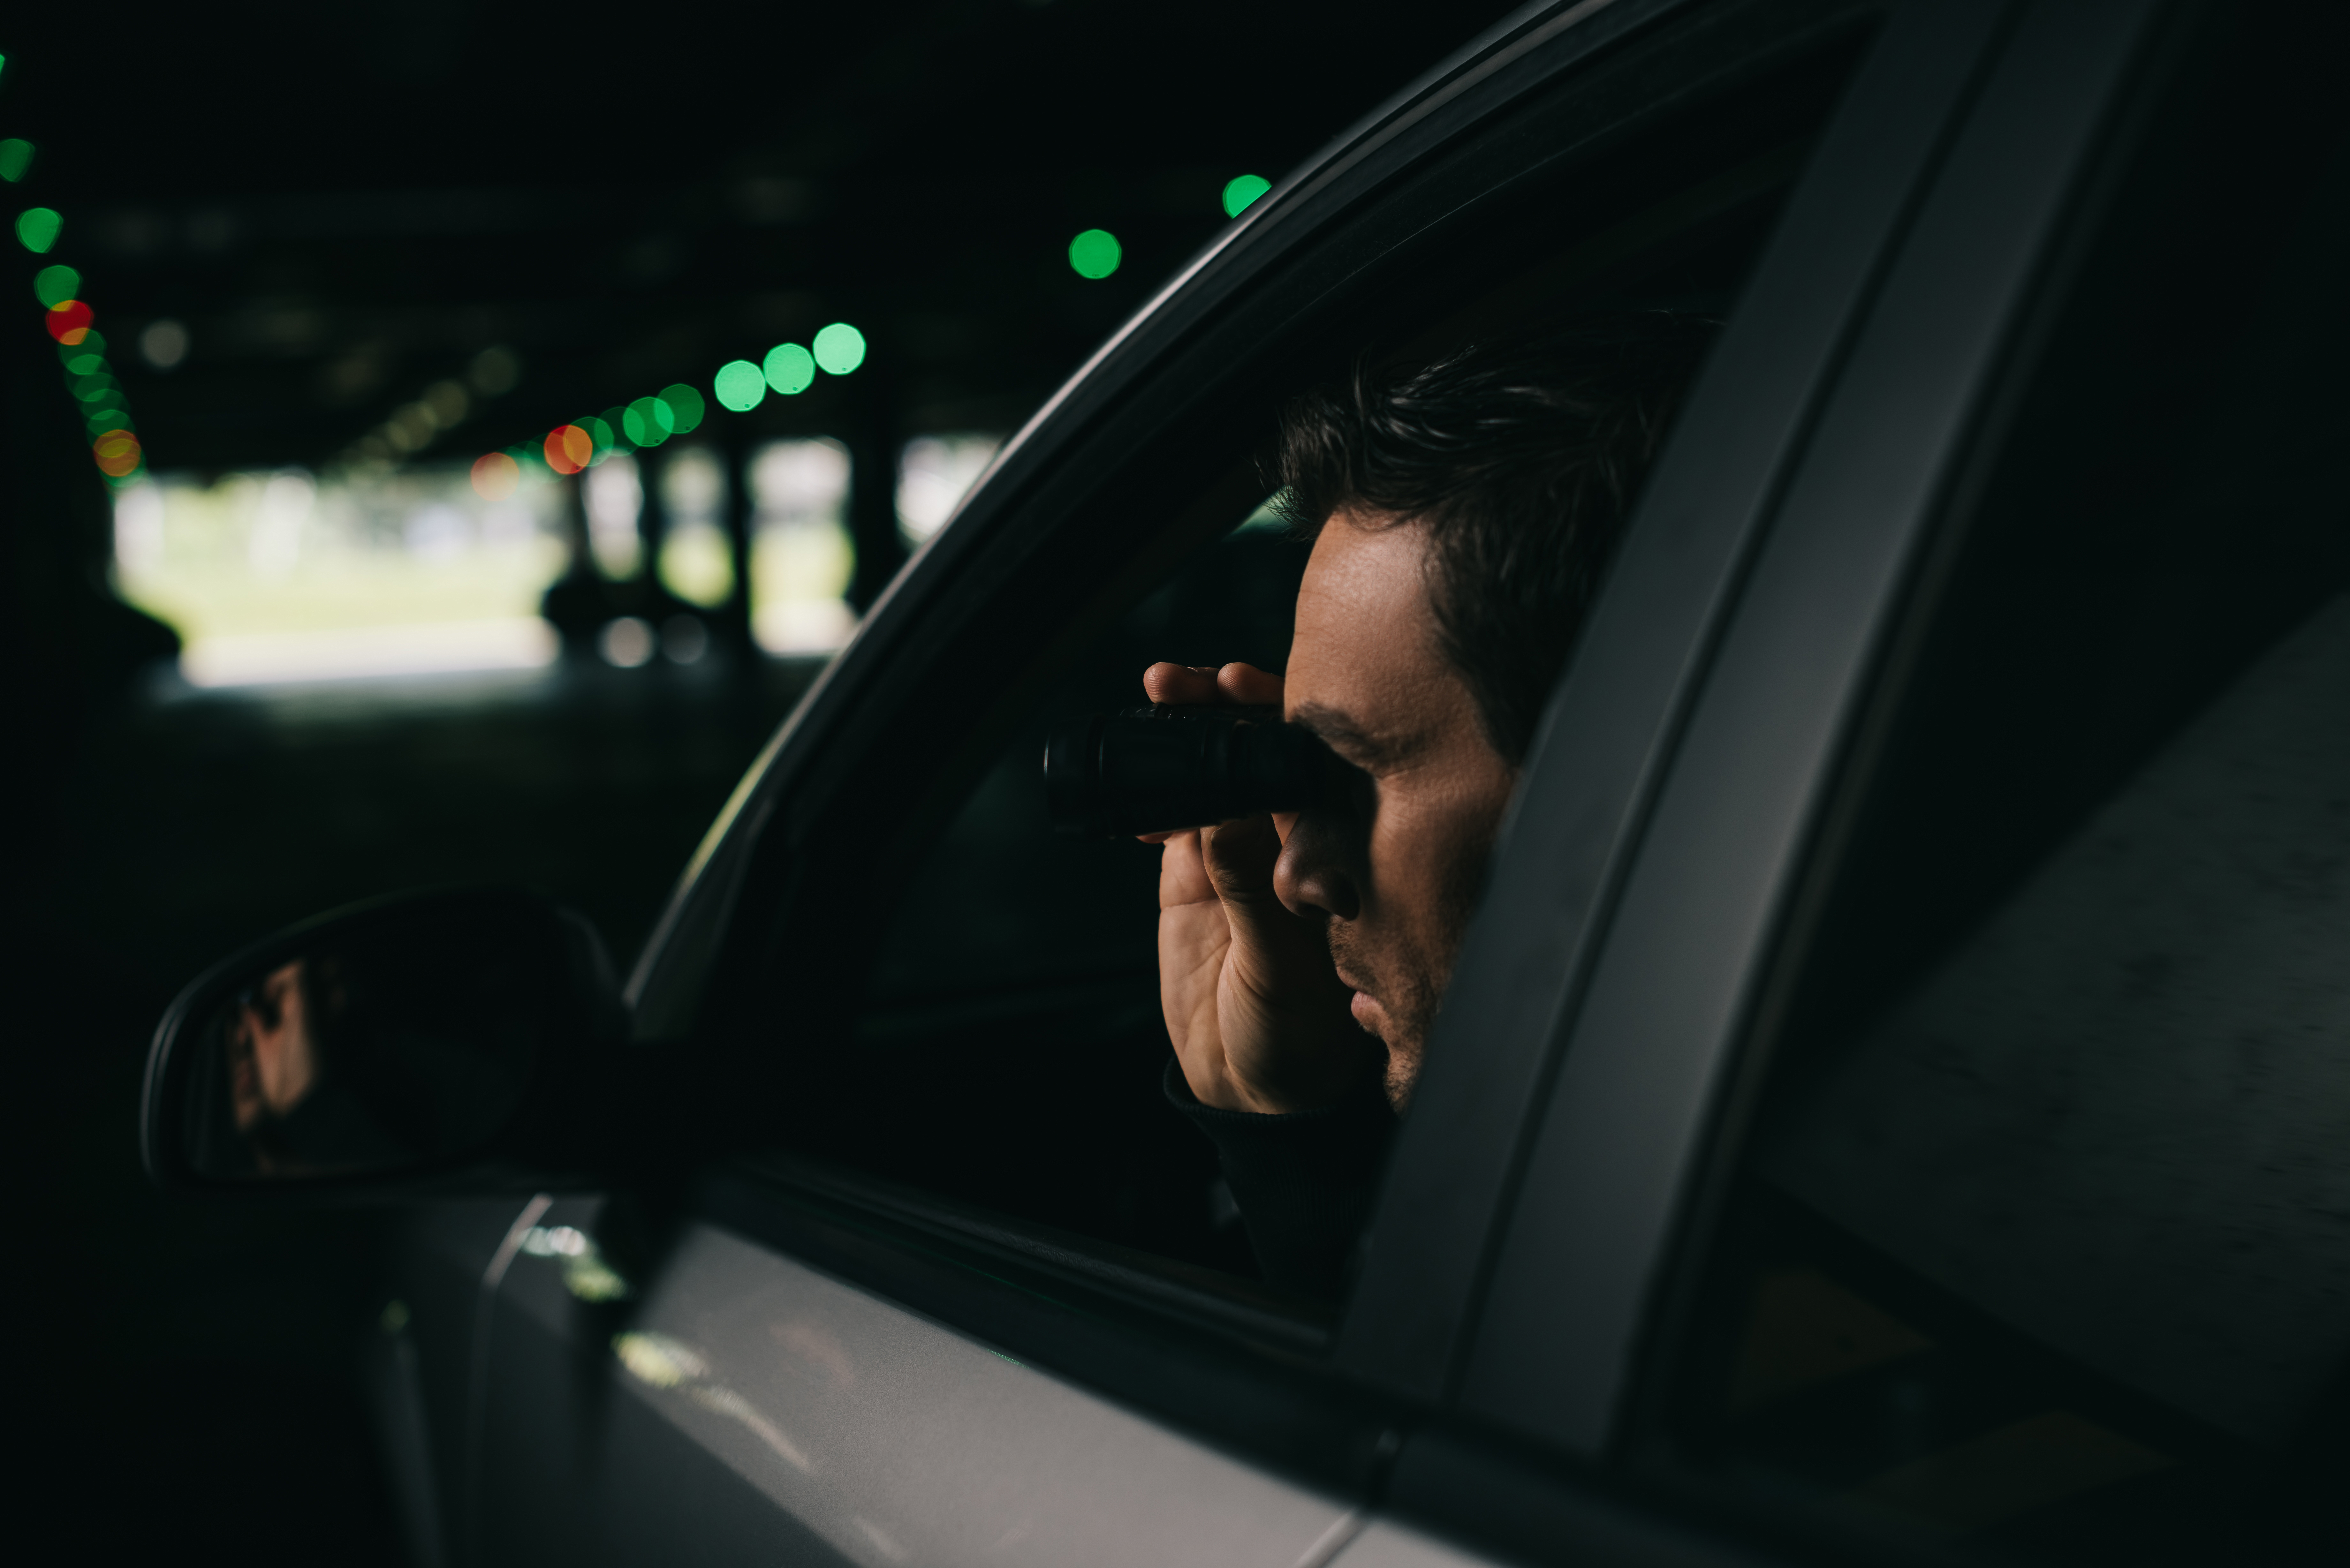 A man using binoculars while sitting in his car | Source: Shutterstock